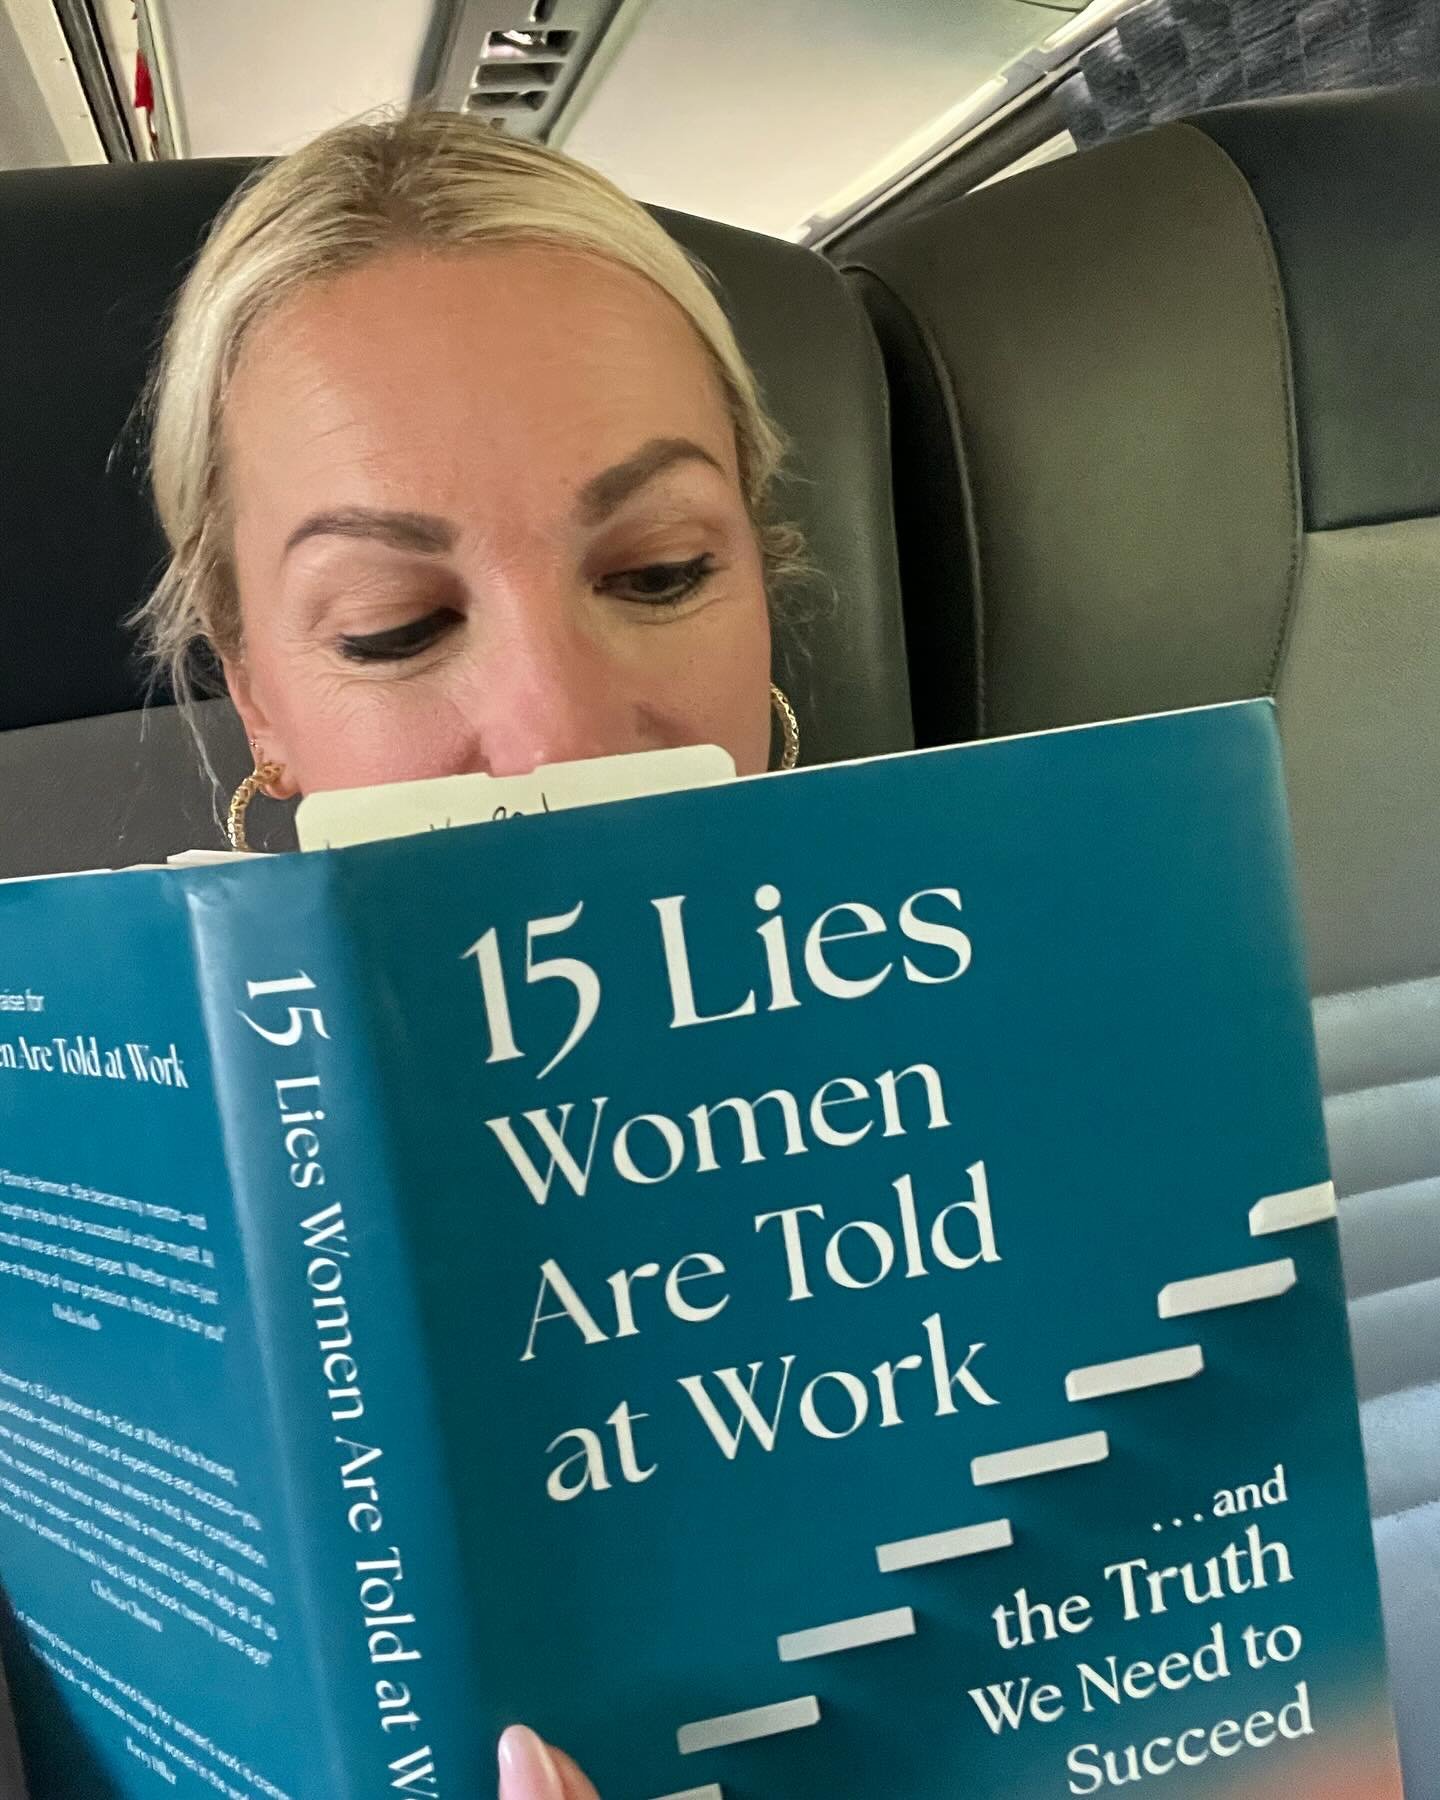 I'm so excited to join my friend Bonnie tomorrow for a chat about her new book &quot;15 Lies Women Are Told at Work&quot; it is SO good and SO impactful. I have so many questions! Come see us if you're near New Canaan, CT! (Link in my stories for tic